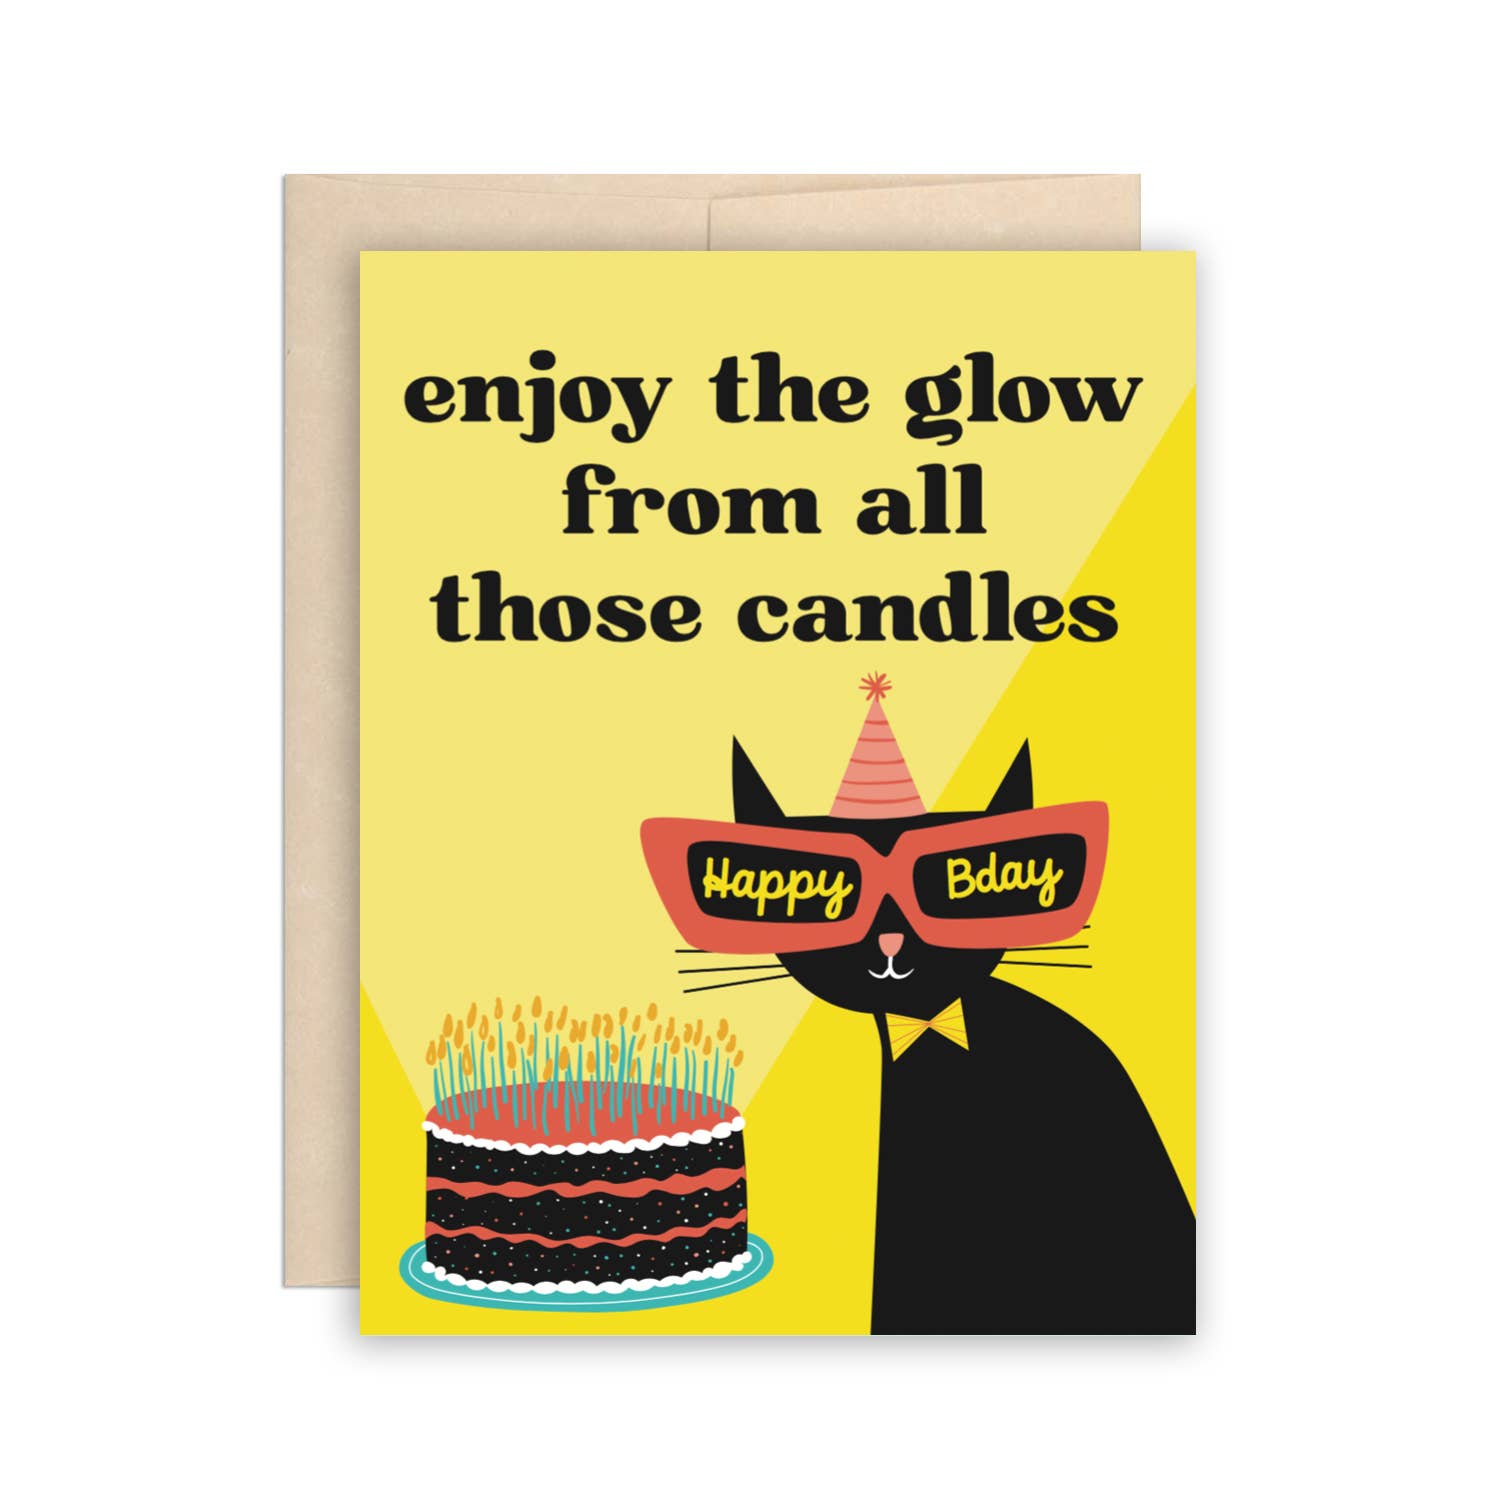 The Beautiful Project "Enjoy the Glow" Card